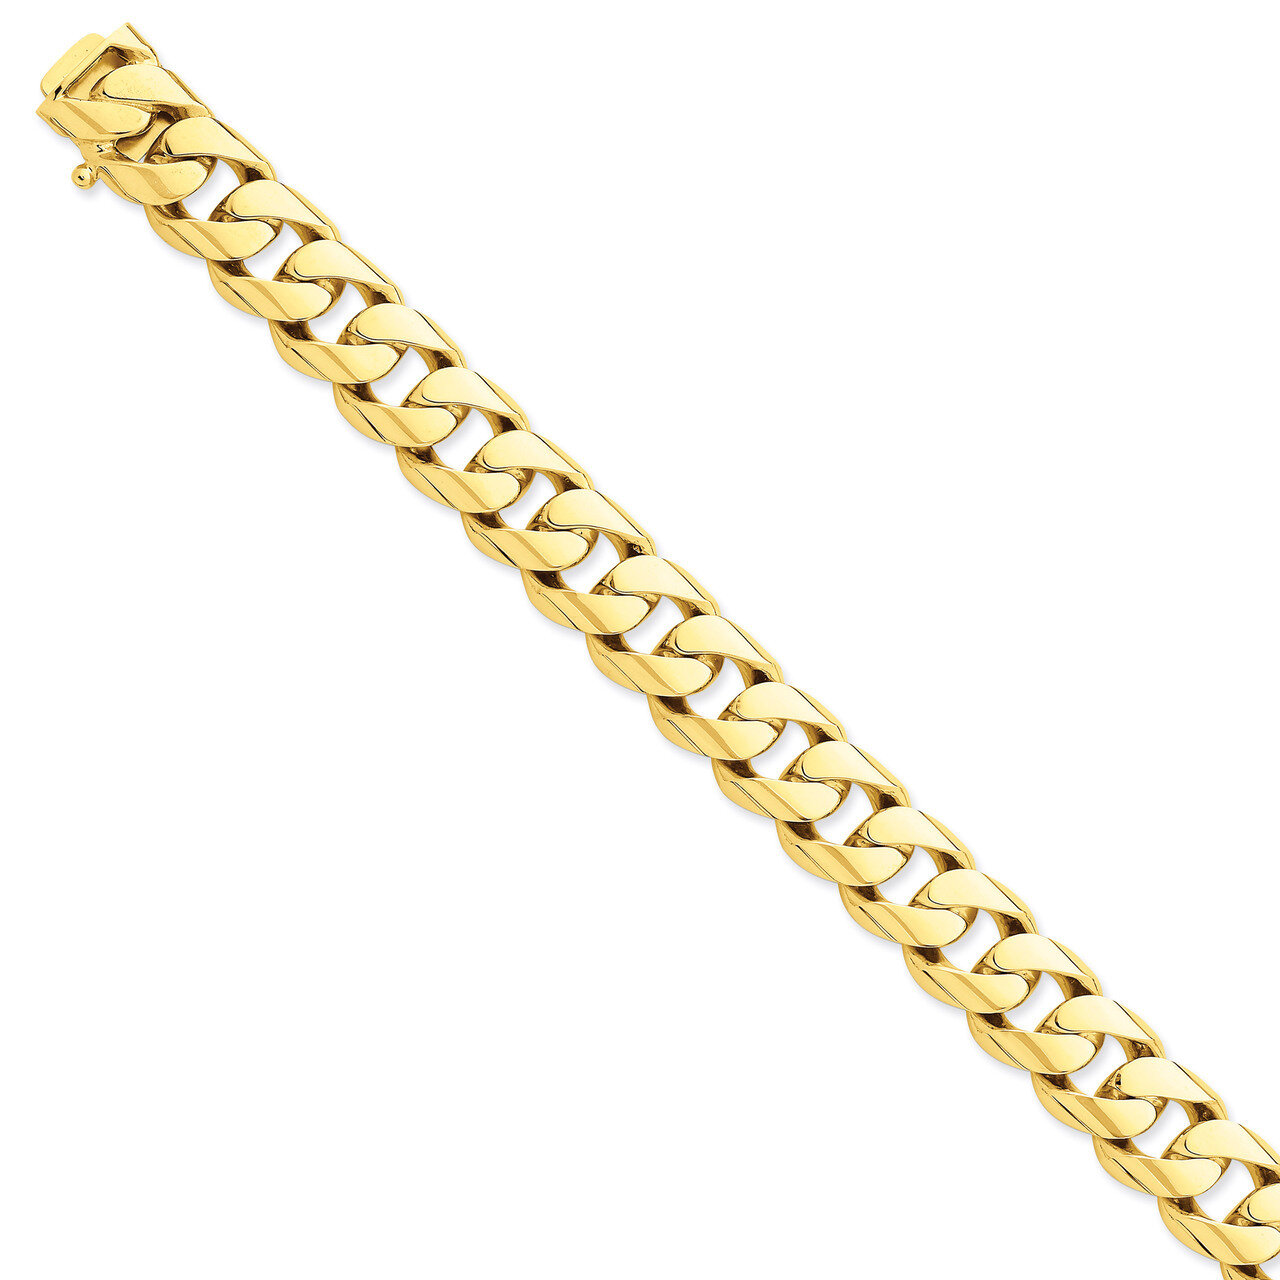 13mm Hand-polished Rounded Curb Chain 8 Inch 14k Gold LK128-8